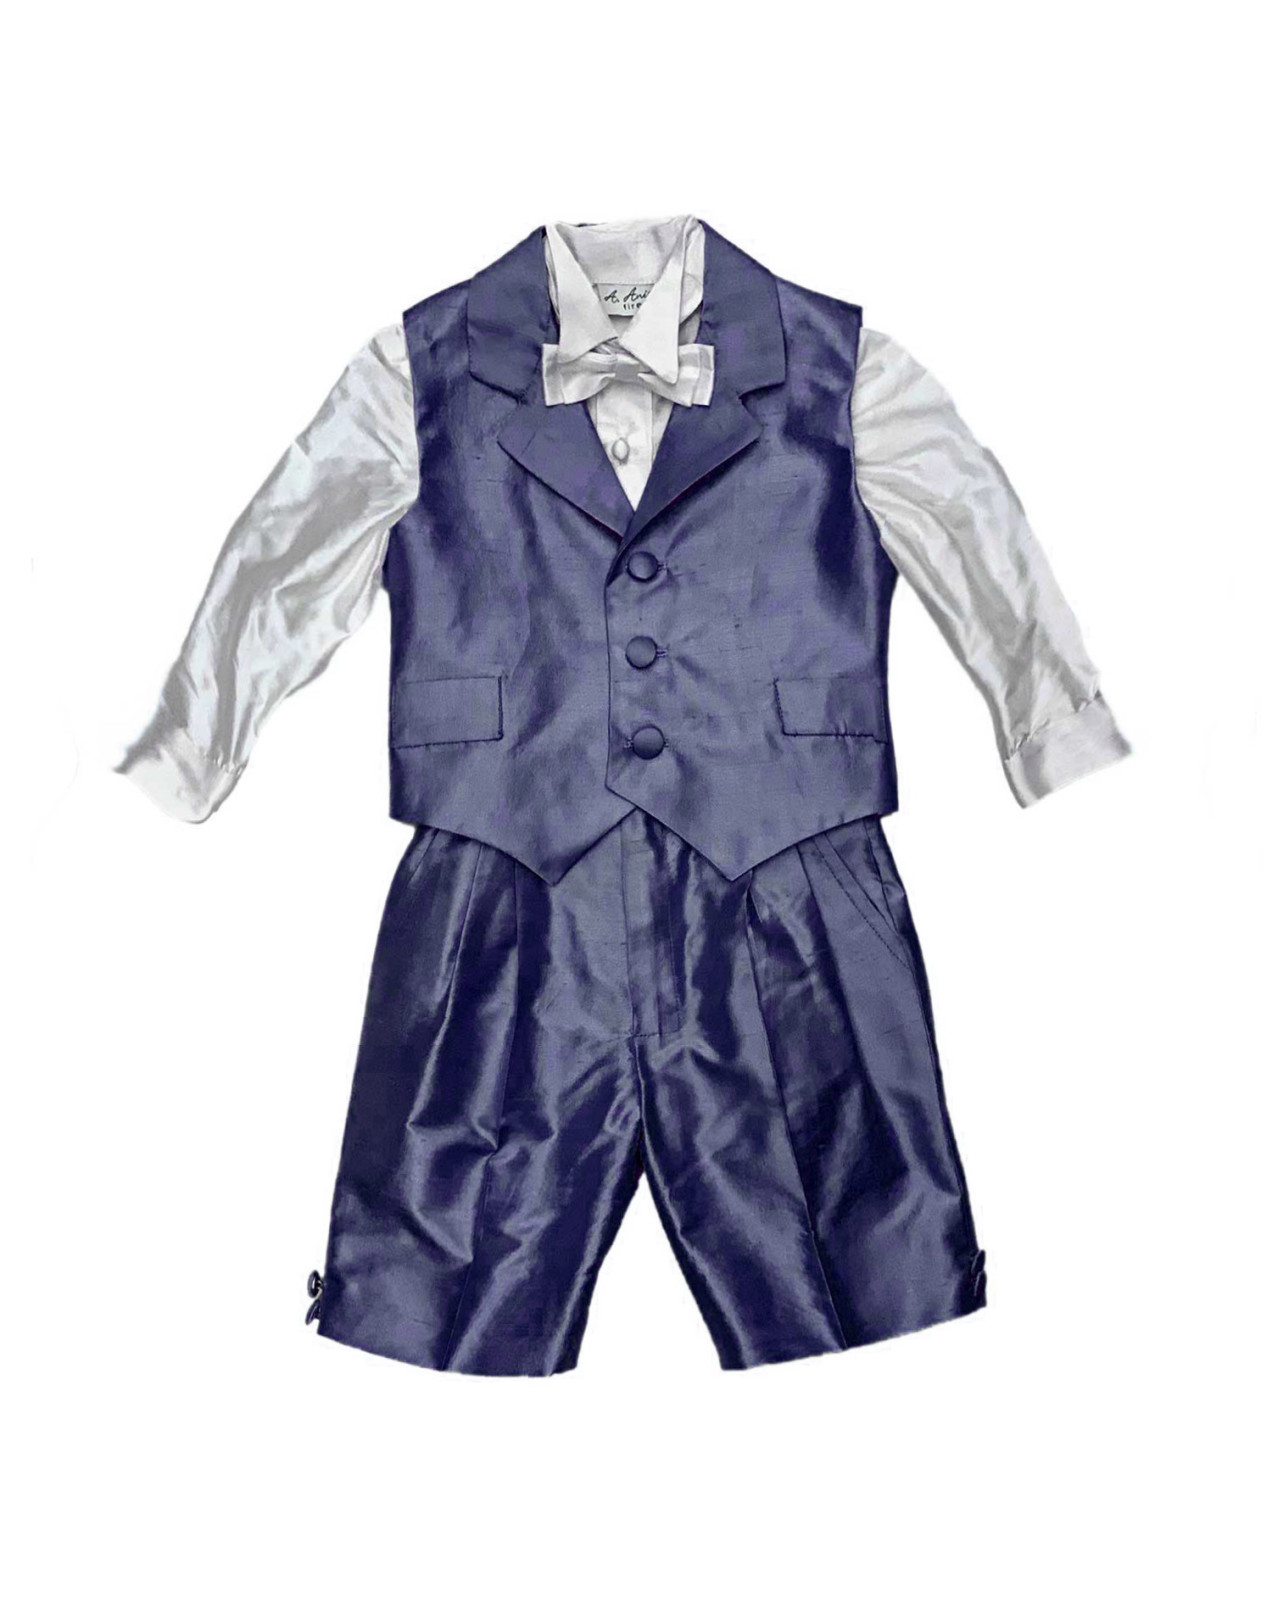 Baby boy special occasion outfit - Navy Blue